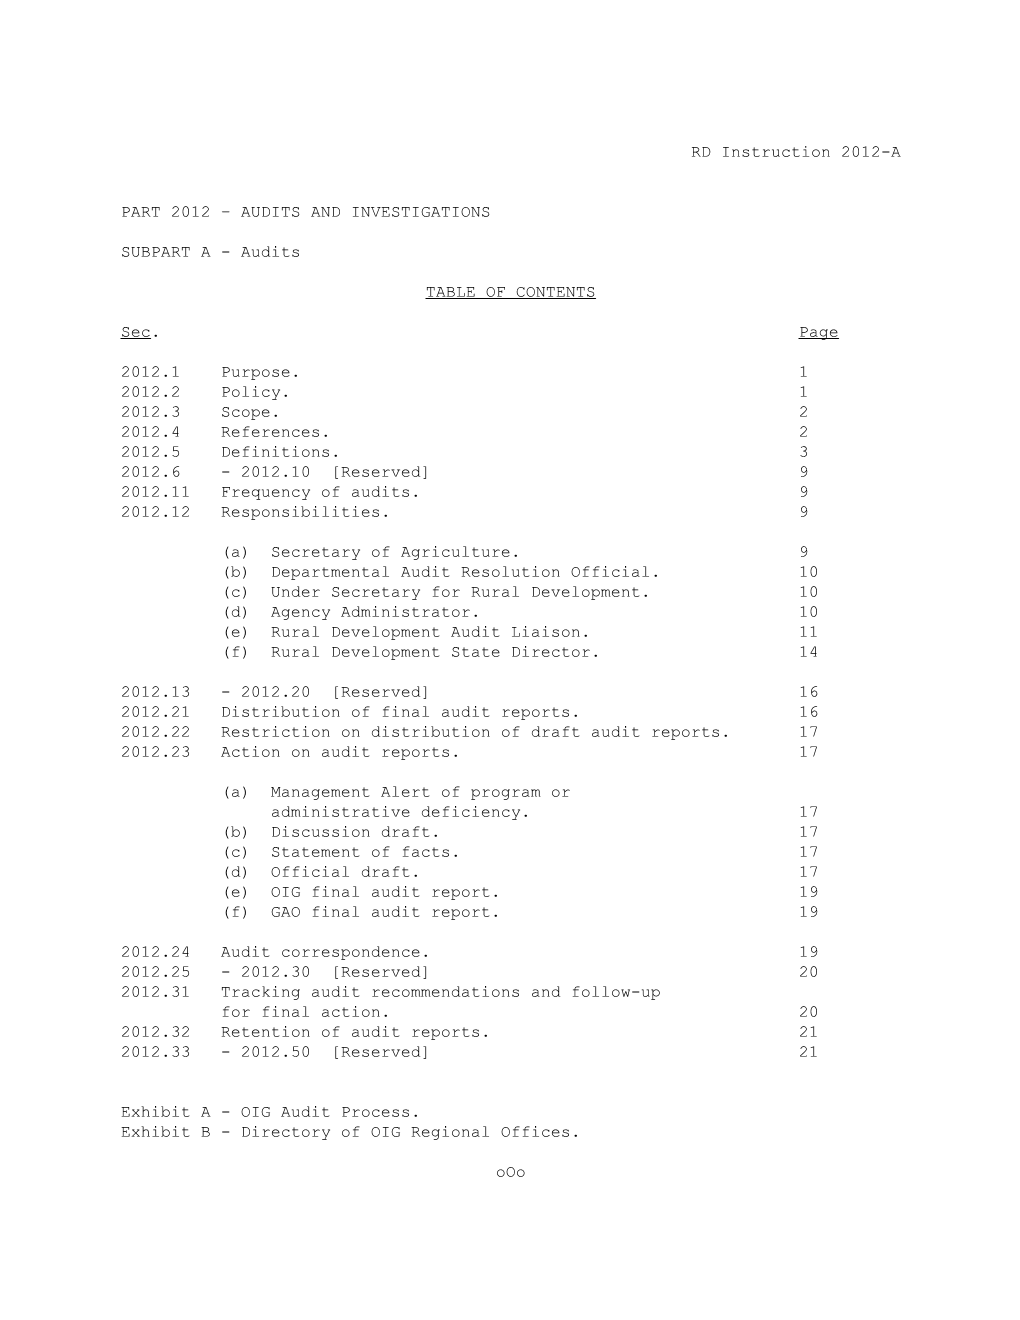 Part 2012 Audits and Investigations